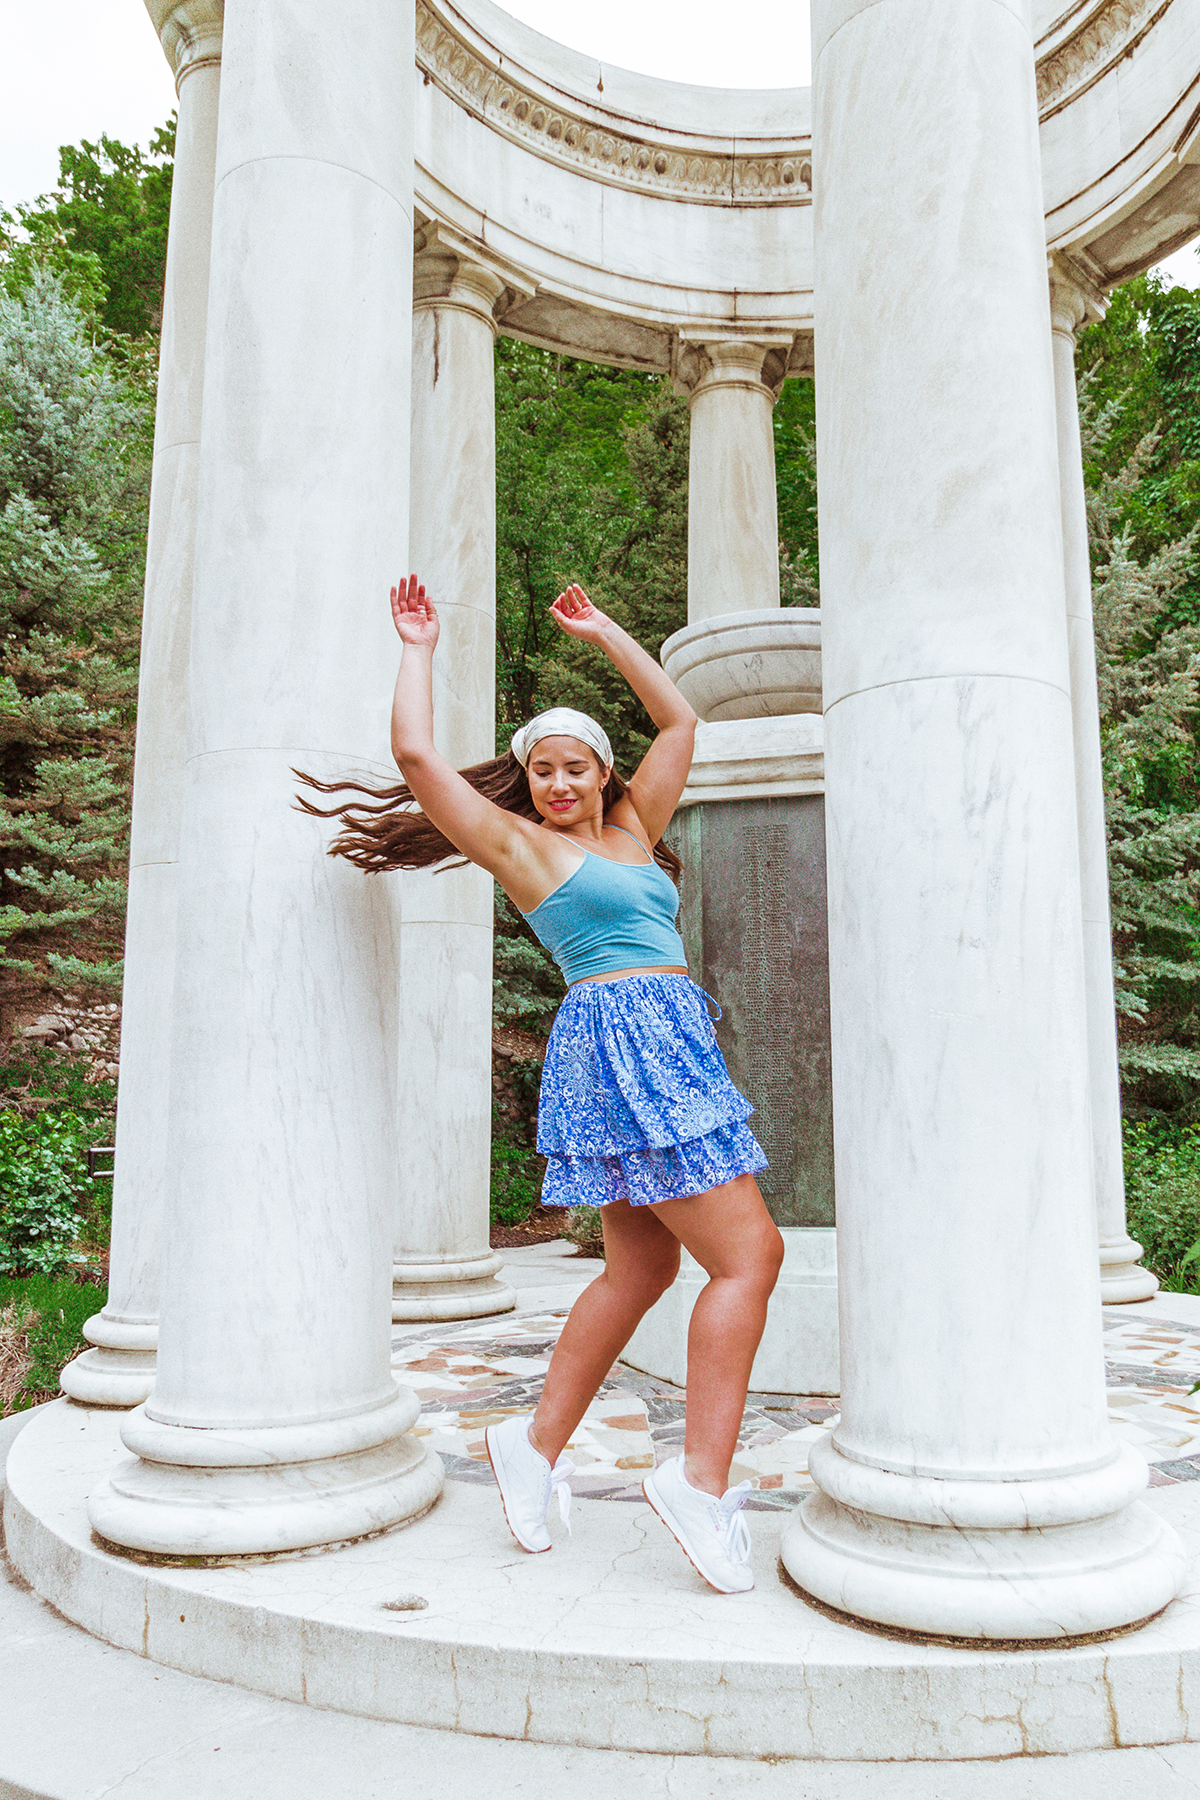 a woman stands on her tip toes spinning under tall marble columns in a park. Her corse, freshly washed hair is in the air behind her while she wears sneakers, a mini skirt, a tank top, and a bandana on her head